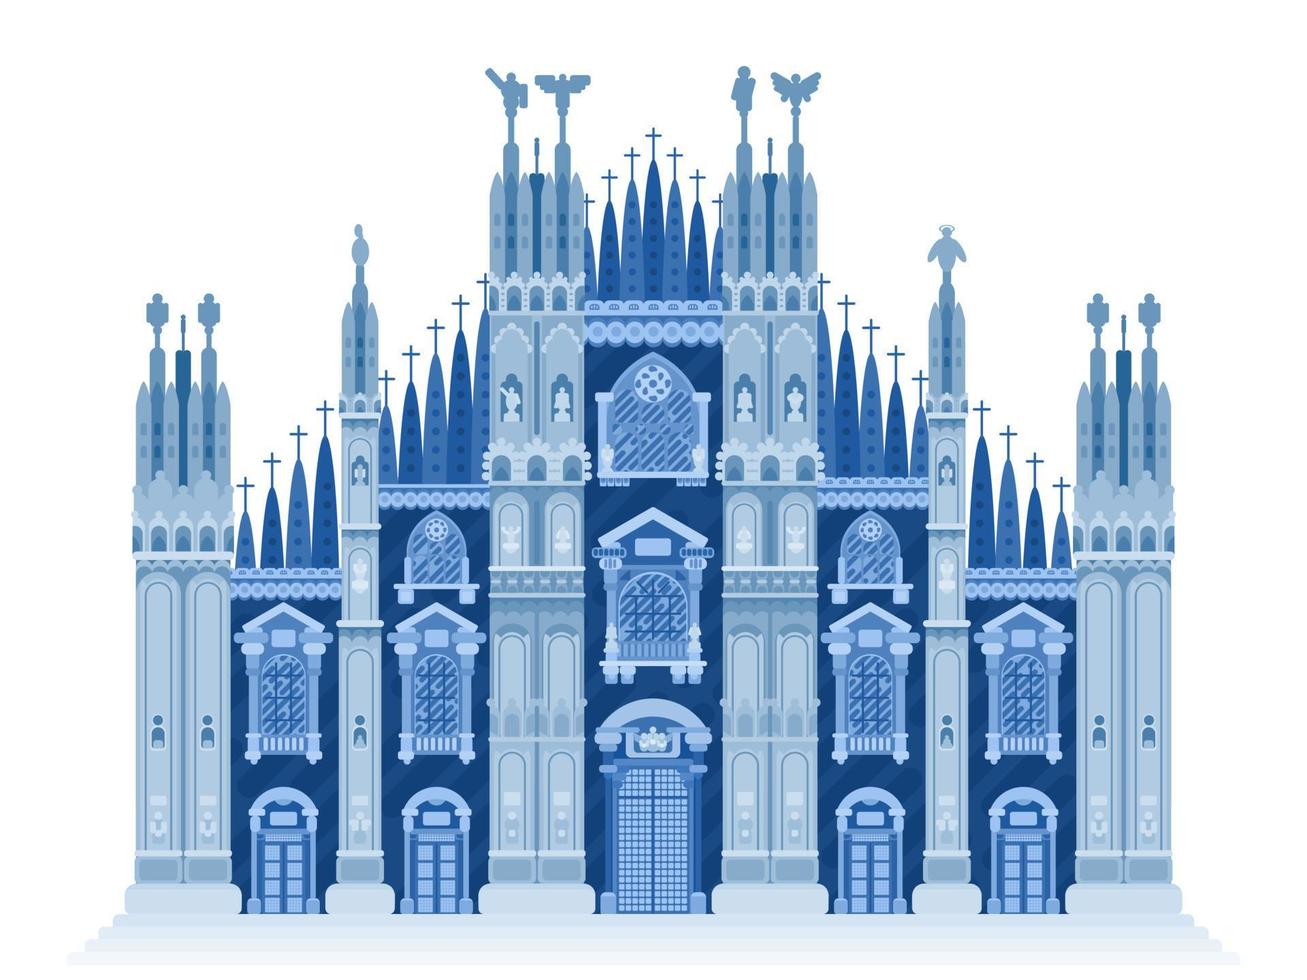 Milan cathedral blue illustration flat style new vector